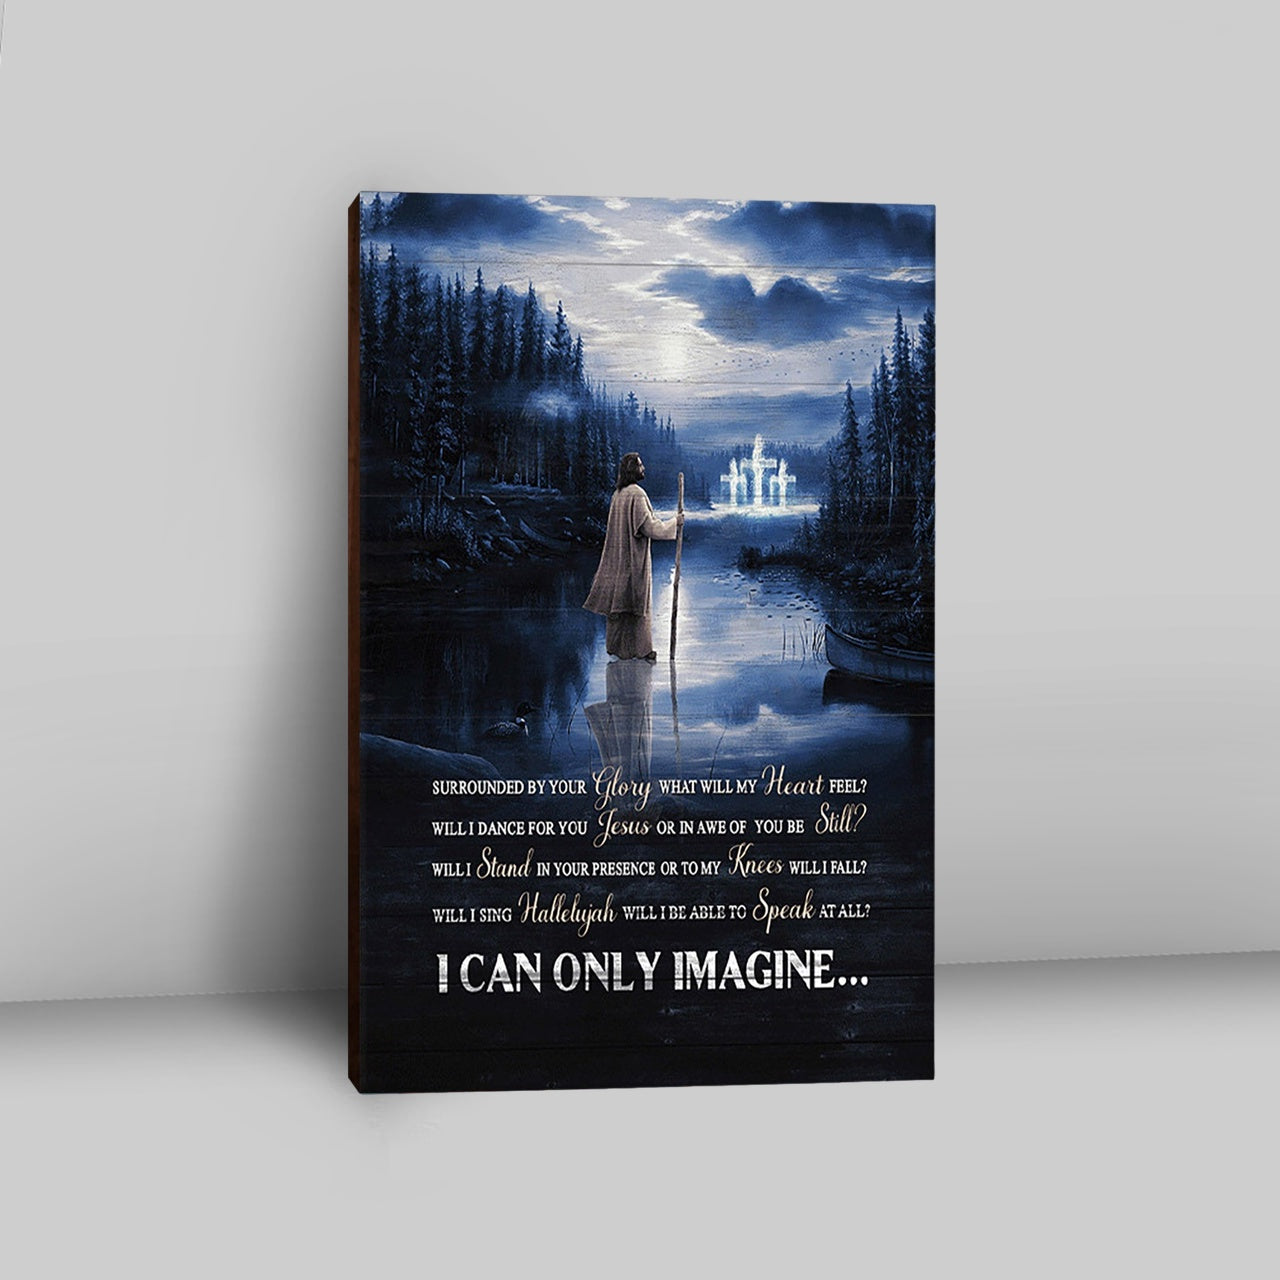 I Can Only Imagine Canvas - Jesus Walking On Water Canvas Wall Art - Bible Verse Canvas Art - Inspirational Art - Christian Home Decor